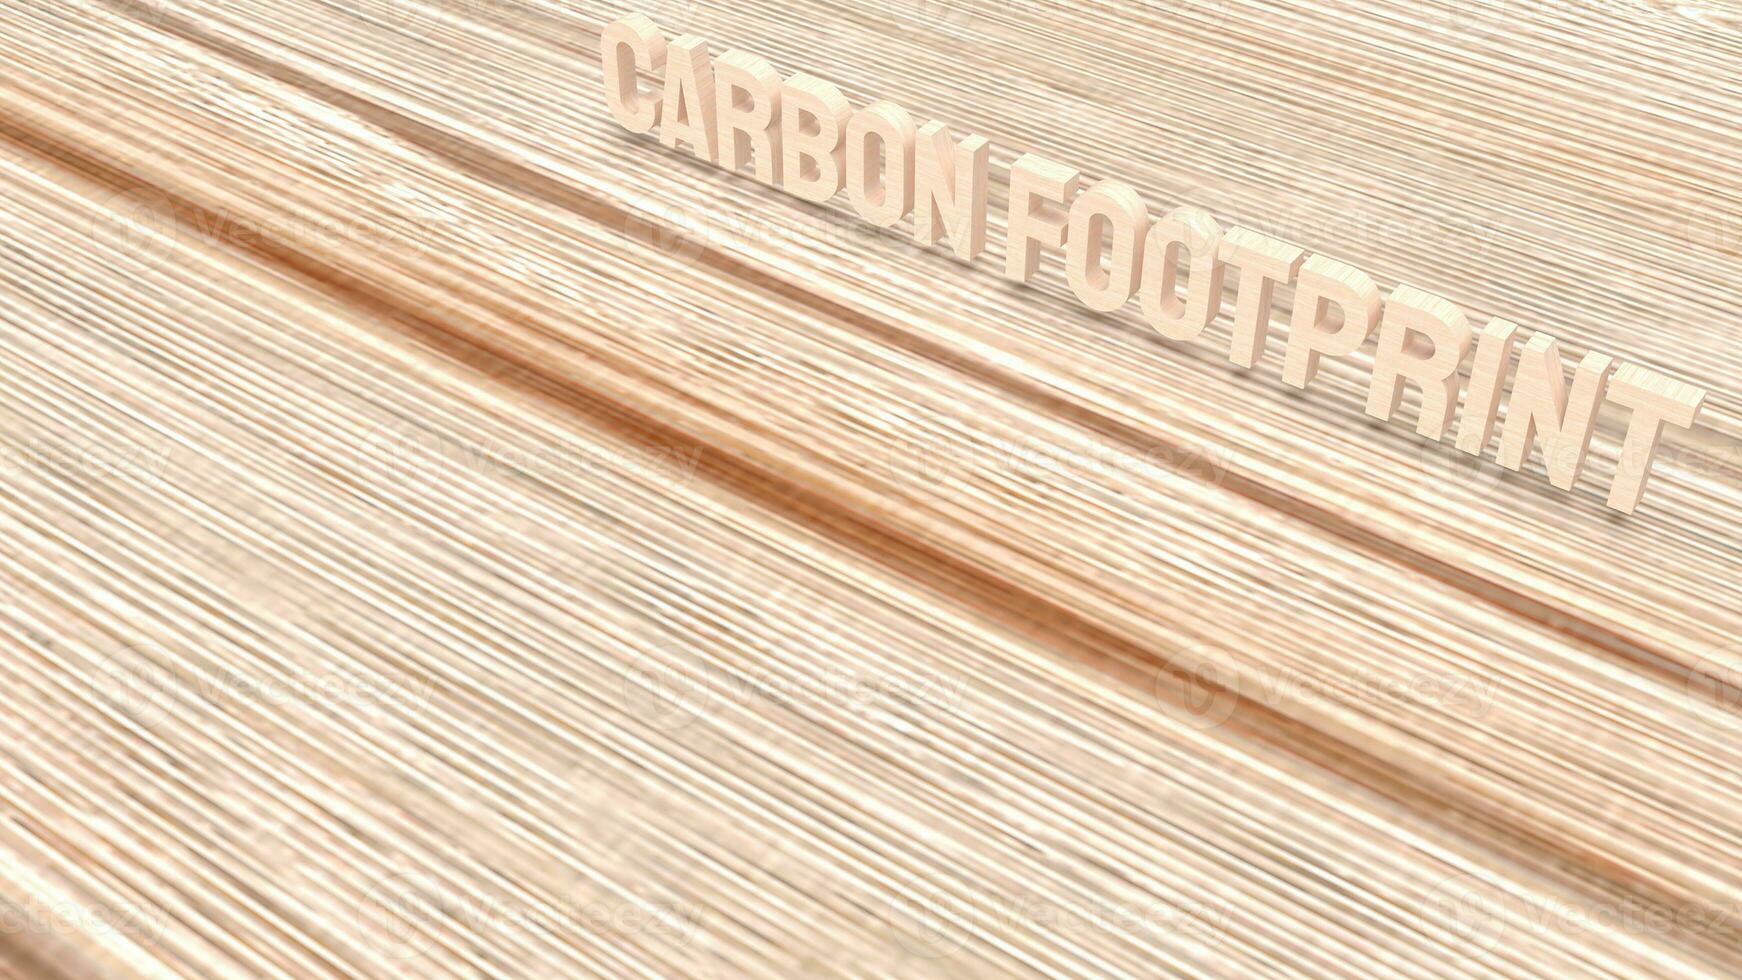 The  carbon footprint wood for climate change or eco concept 3d rendering. photo